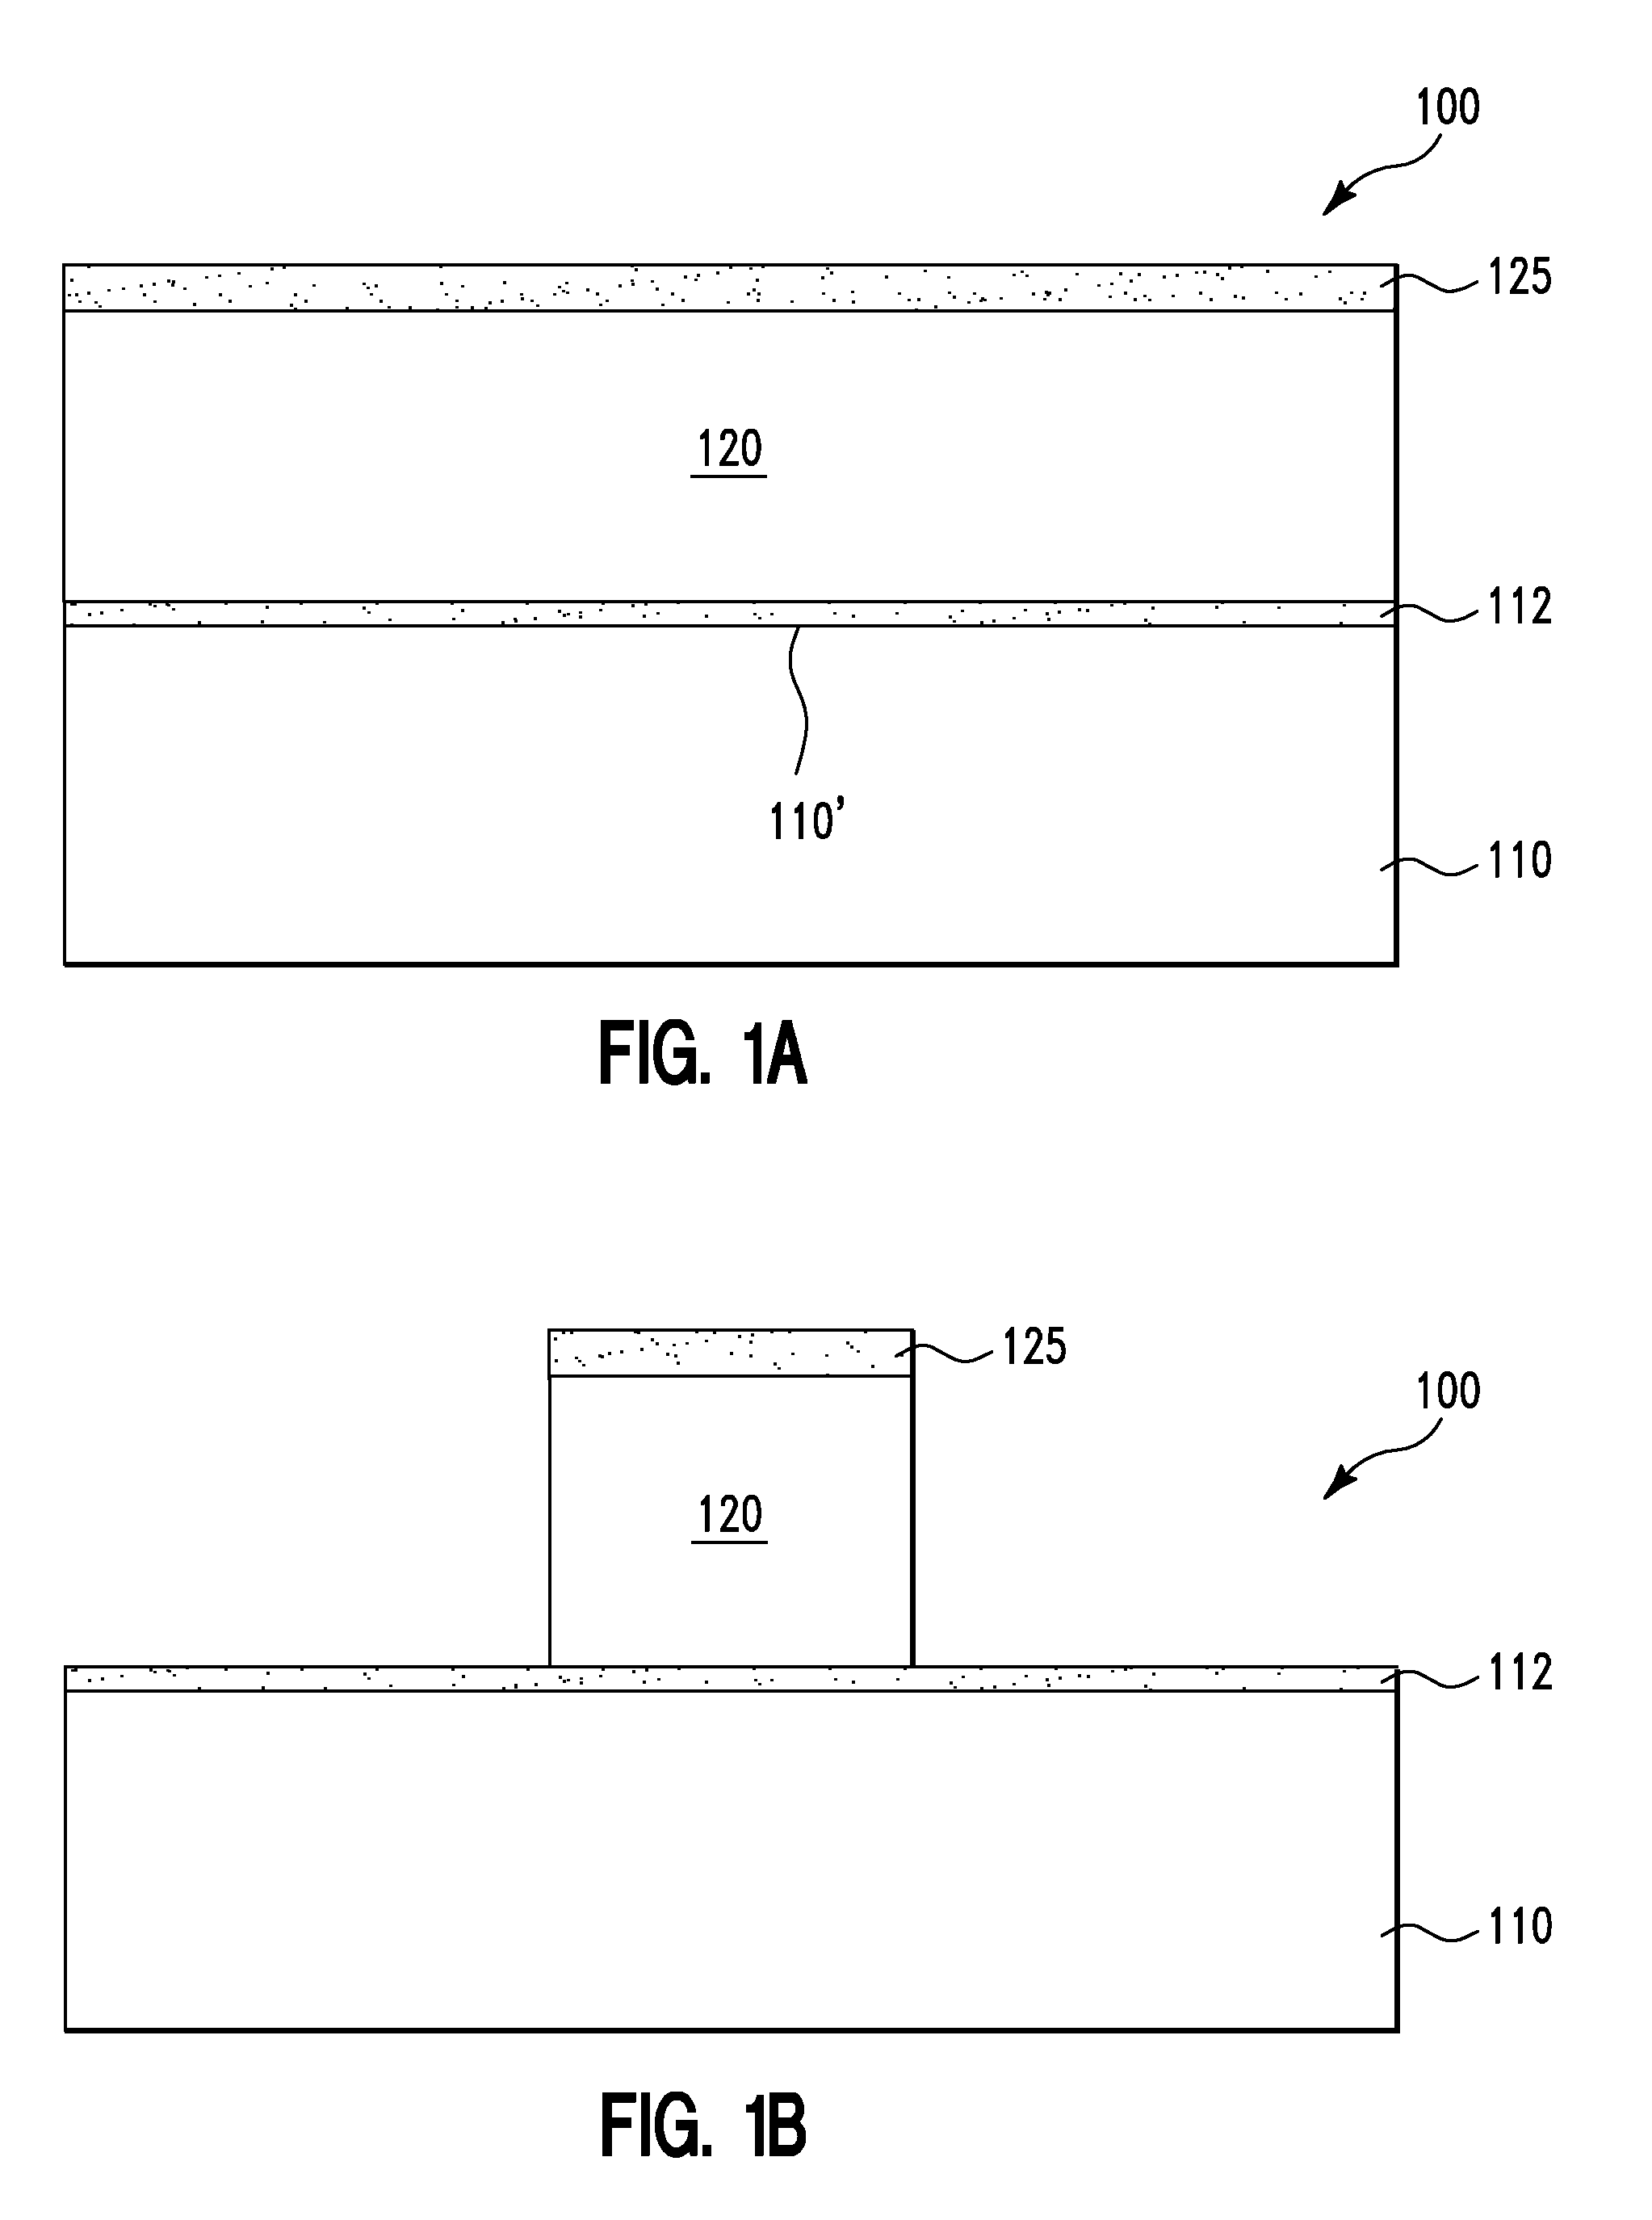 Semiconductor transistors having high-K gate dielectric layers, metal gate electrode regions, and low fringing capacitances